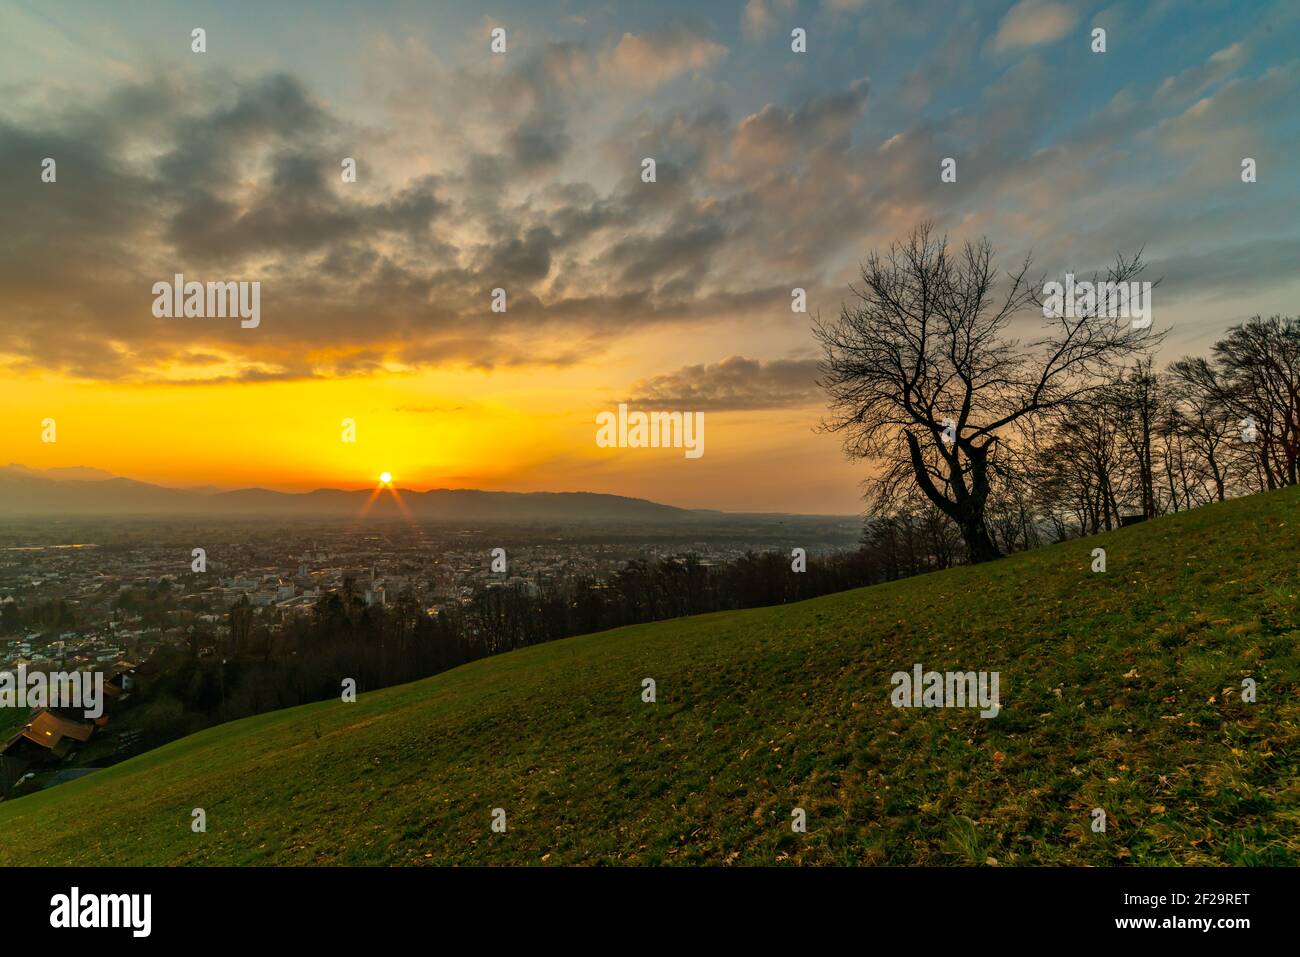 Sunset with afterglow over the Rhine valley. Dornbirn lies in the misty valley, Swiss mountains are above. single tree stands on the sloping meadow Stock Photo